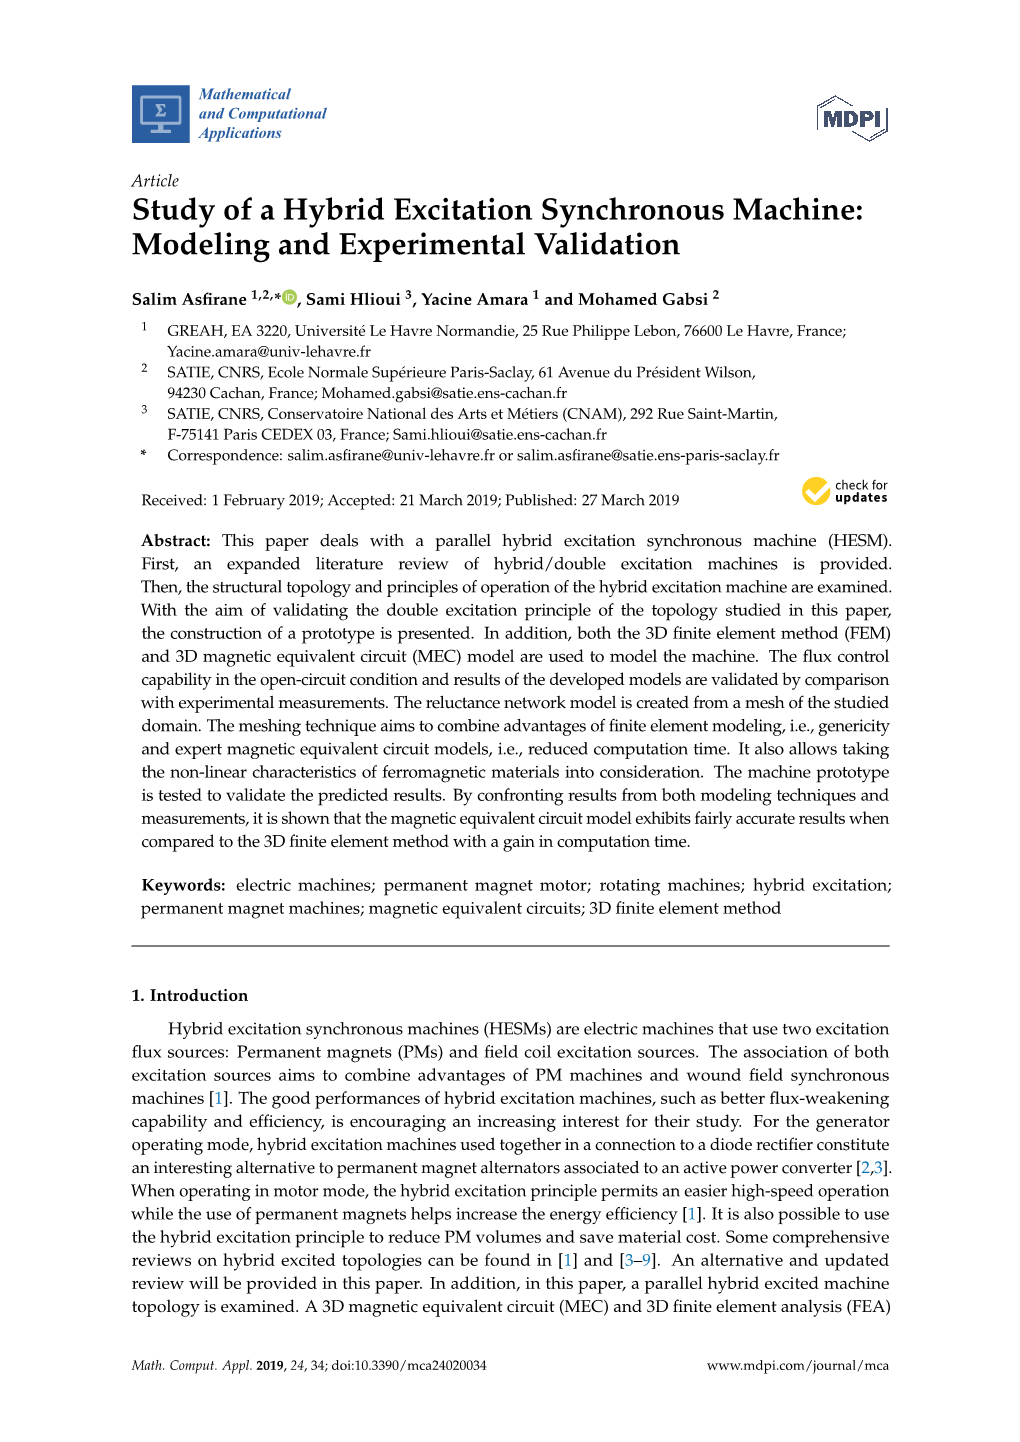 Study of a Hybrid Excitation Synchronous Machine: Modeling and Experimental Validation